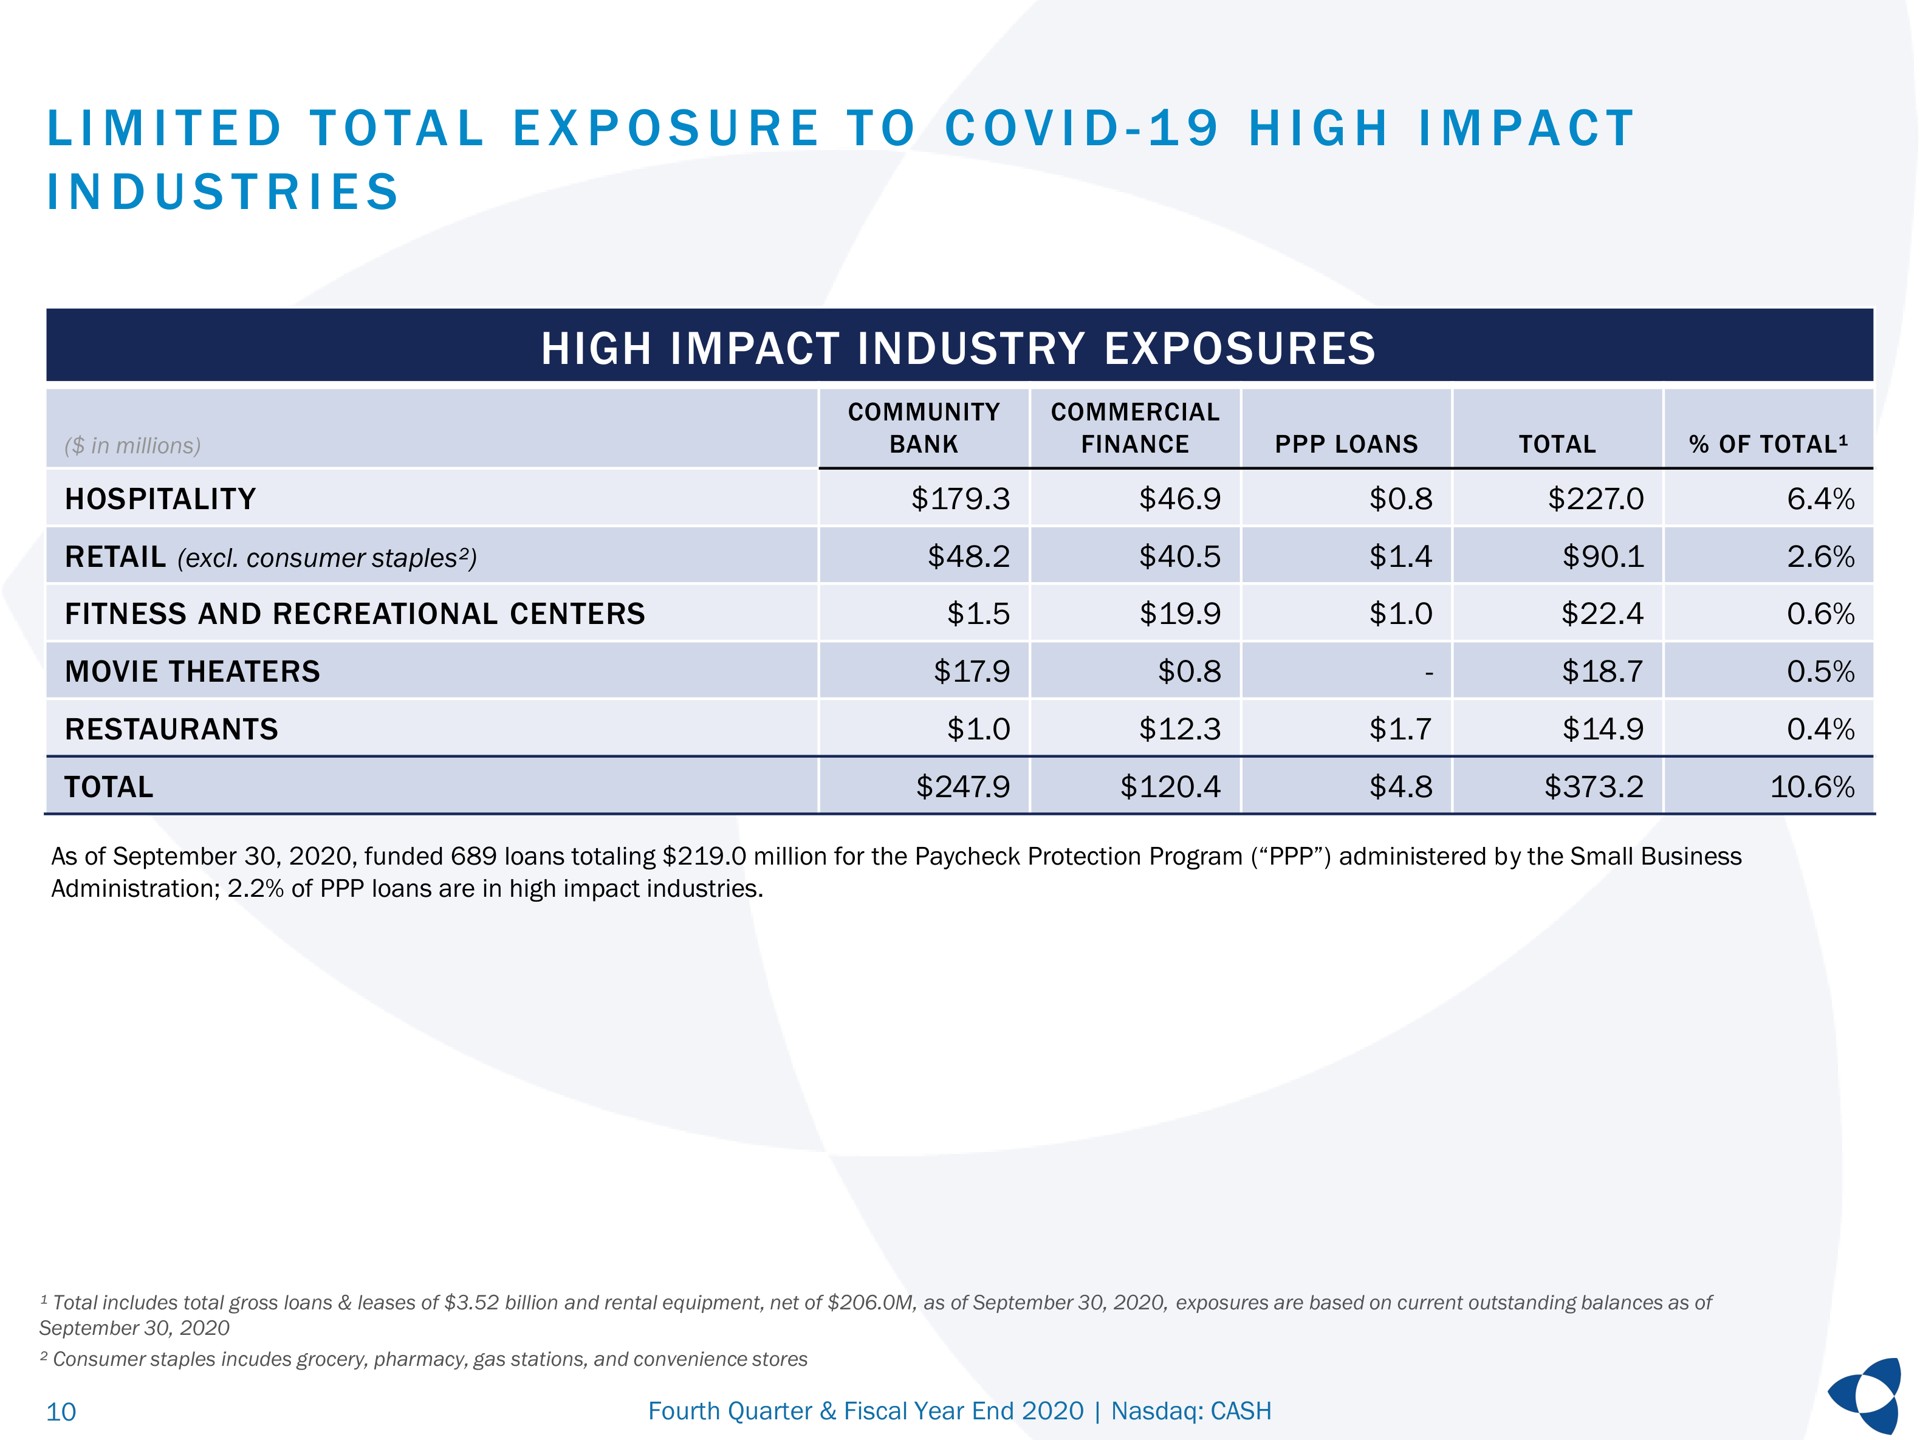 i i i i i a i i high impact industry exposures limited total exposure to covid industries retail consumer staples restaurants total soya | Pathward Financial